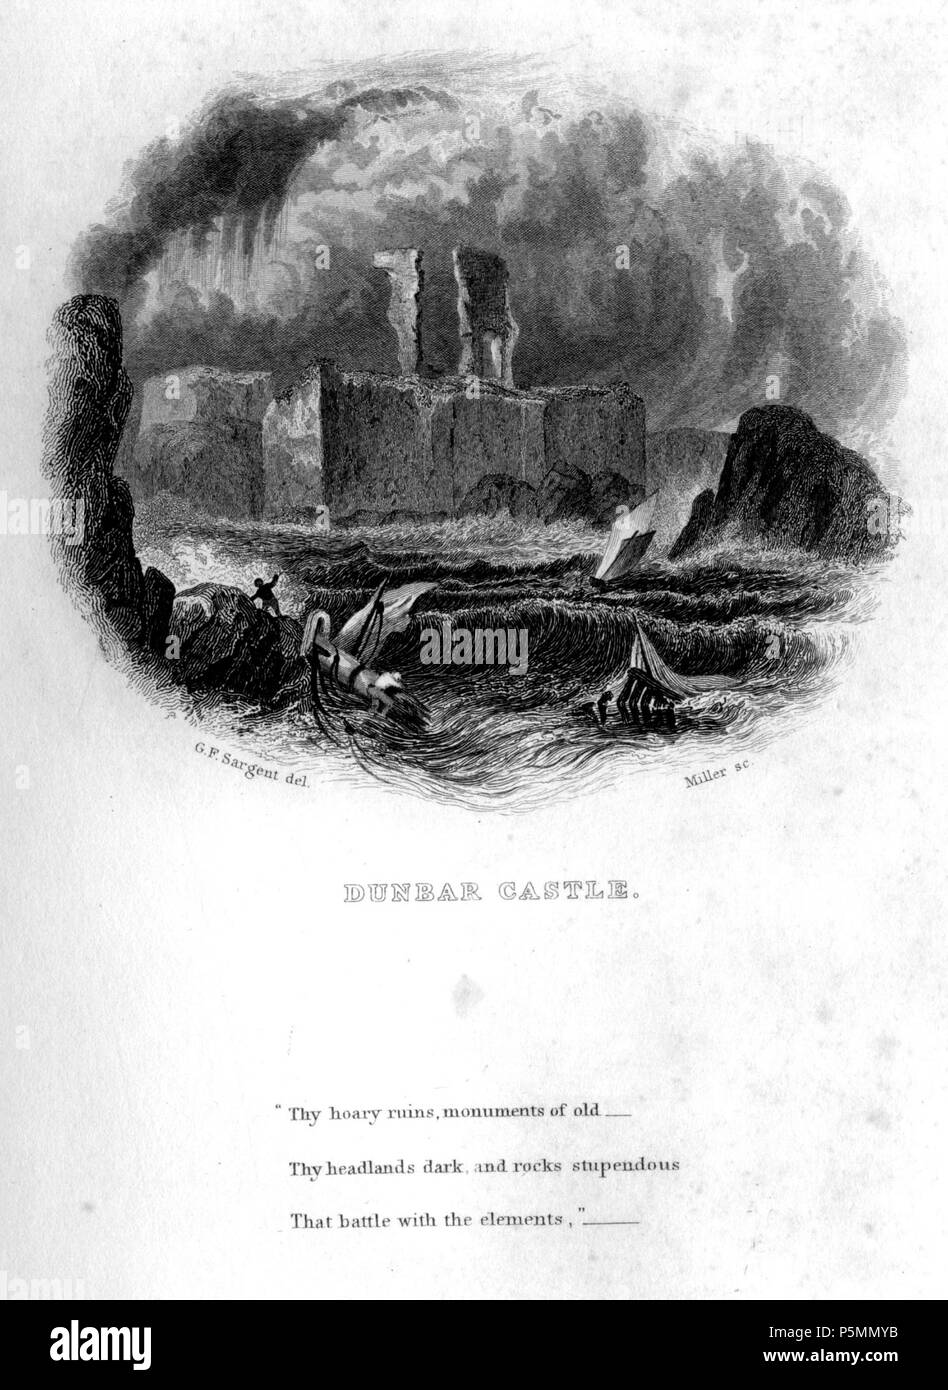 N/A. Dunbar Castle engraving by William Miller after G F Sargent (Miller paid £5-5-0 in xii 1831 for engraving), published in The Castles, Palaces and Prisons of Mary of Scotland. Charles Mackie. London. C Cox, 12, King William St, Strand, Oliver & Boyd Edinburgh, David Robertson, Bookseller to the Queen Glasgow, James Chalmers Dundee, & J Robertson Dublin. 1849 . 1832.   William Miller  (1796–1882)     Alternative names William Frederick I Miller; William Frederick, I Miller  Description Scottish engraver  Date of birth/death 28 May 1796 20 January 1882  Location of birth/death Edinburgh Shef Stock Photo